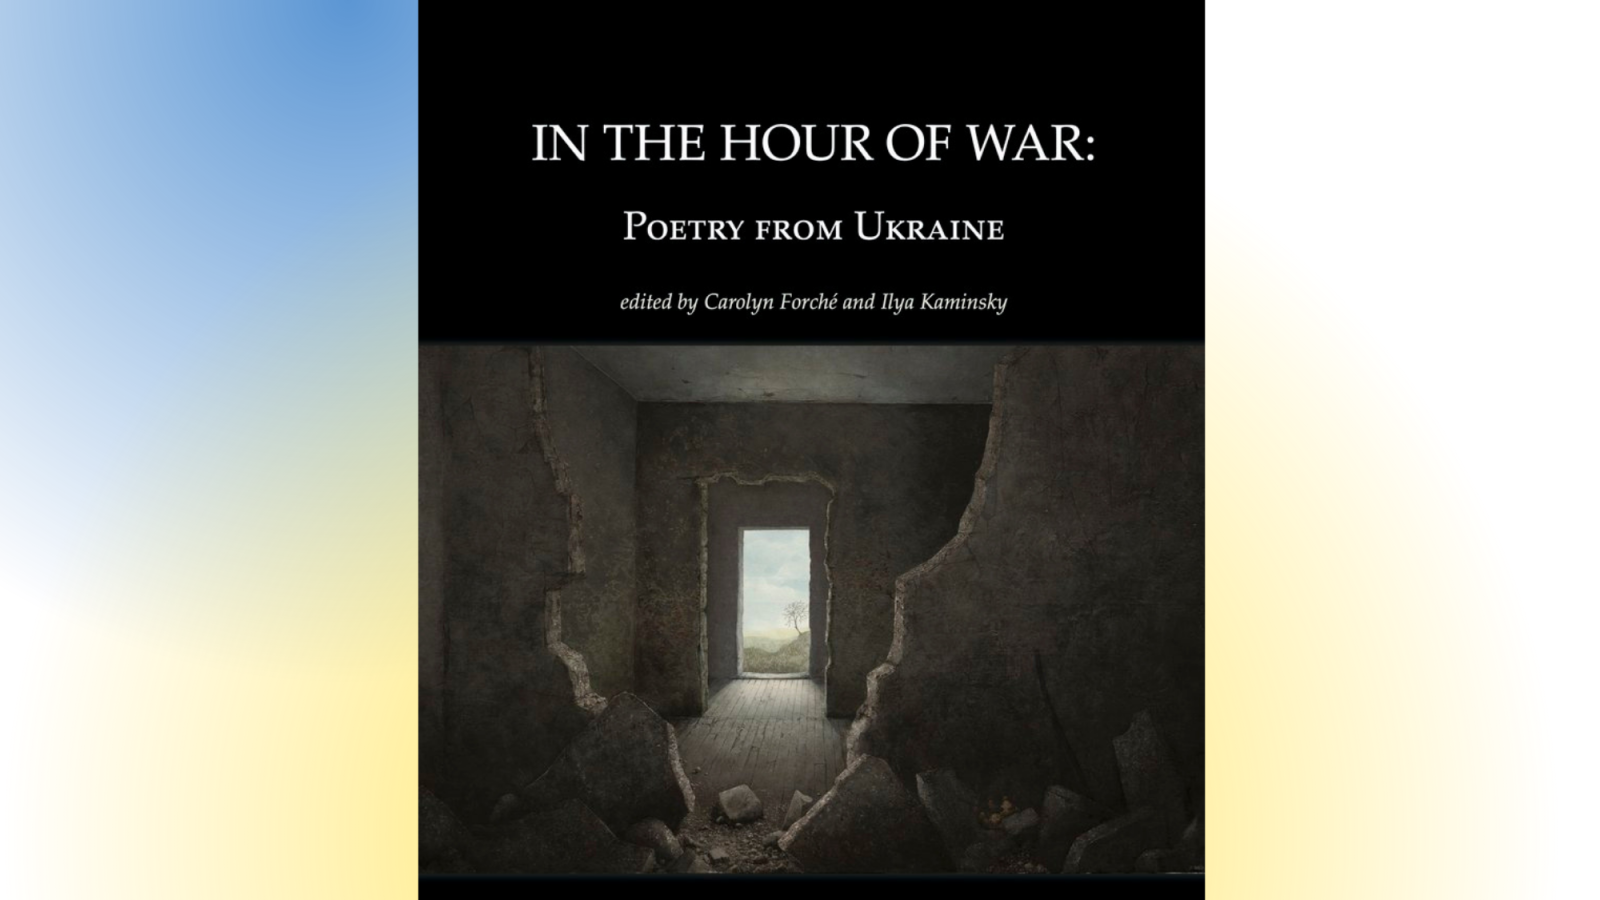 Book cover reads &quot;In the Hour of War: Poetry From Ukraine&quot; Edited by Carolyn Forché and Ilya Kaminsky. Cover shows an illustration of three blown up walls leading to an open landscape.